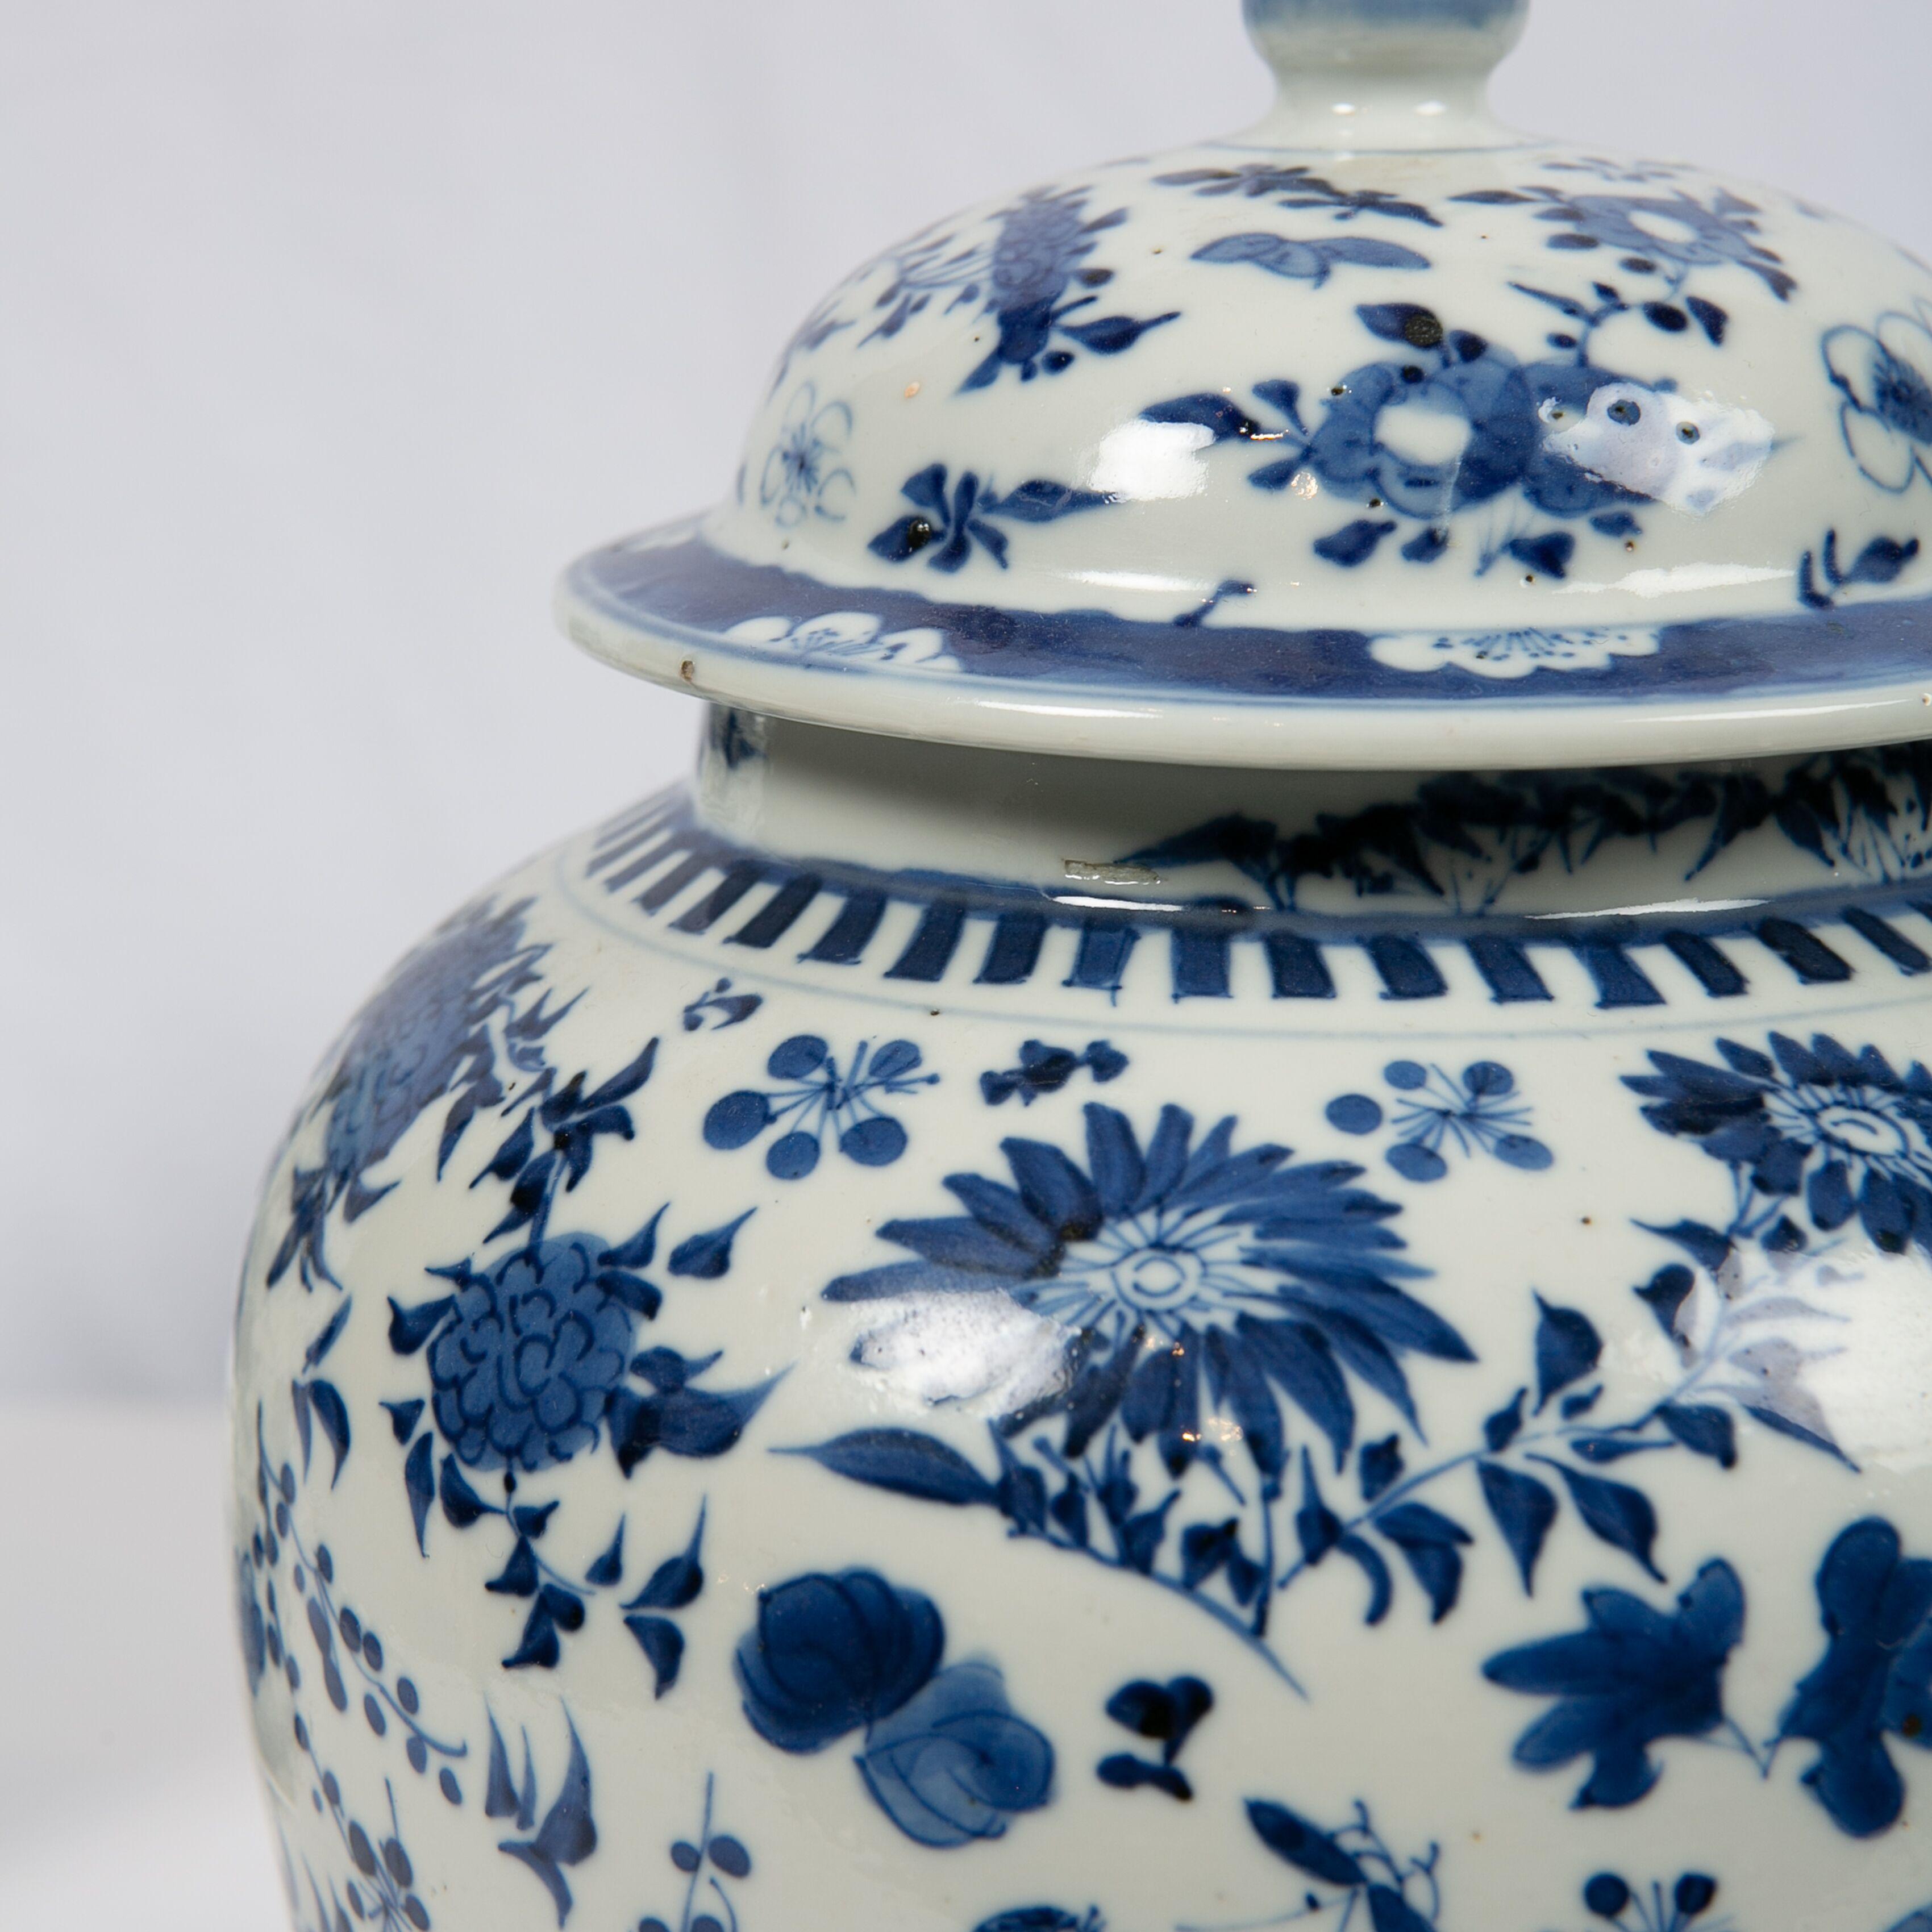 Pair of Chinese Porcelain Blue and White Covered Jars 19th Century Qing Dynasty 2